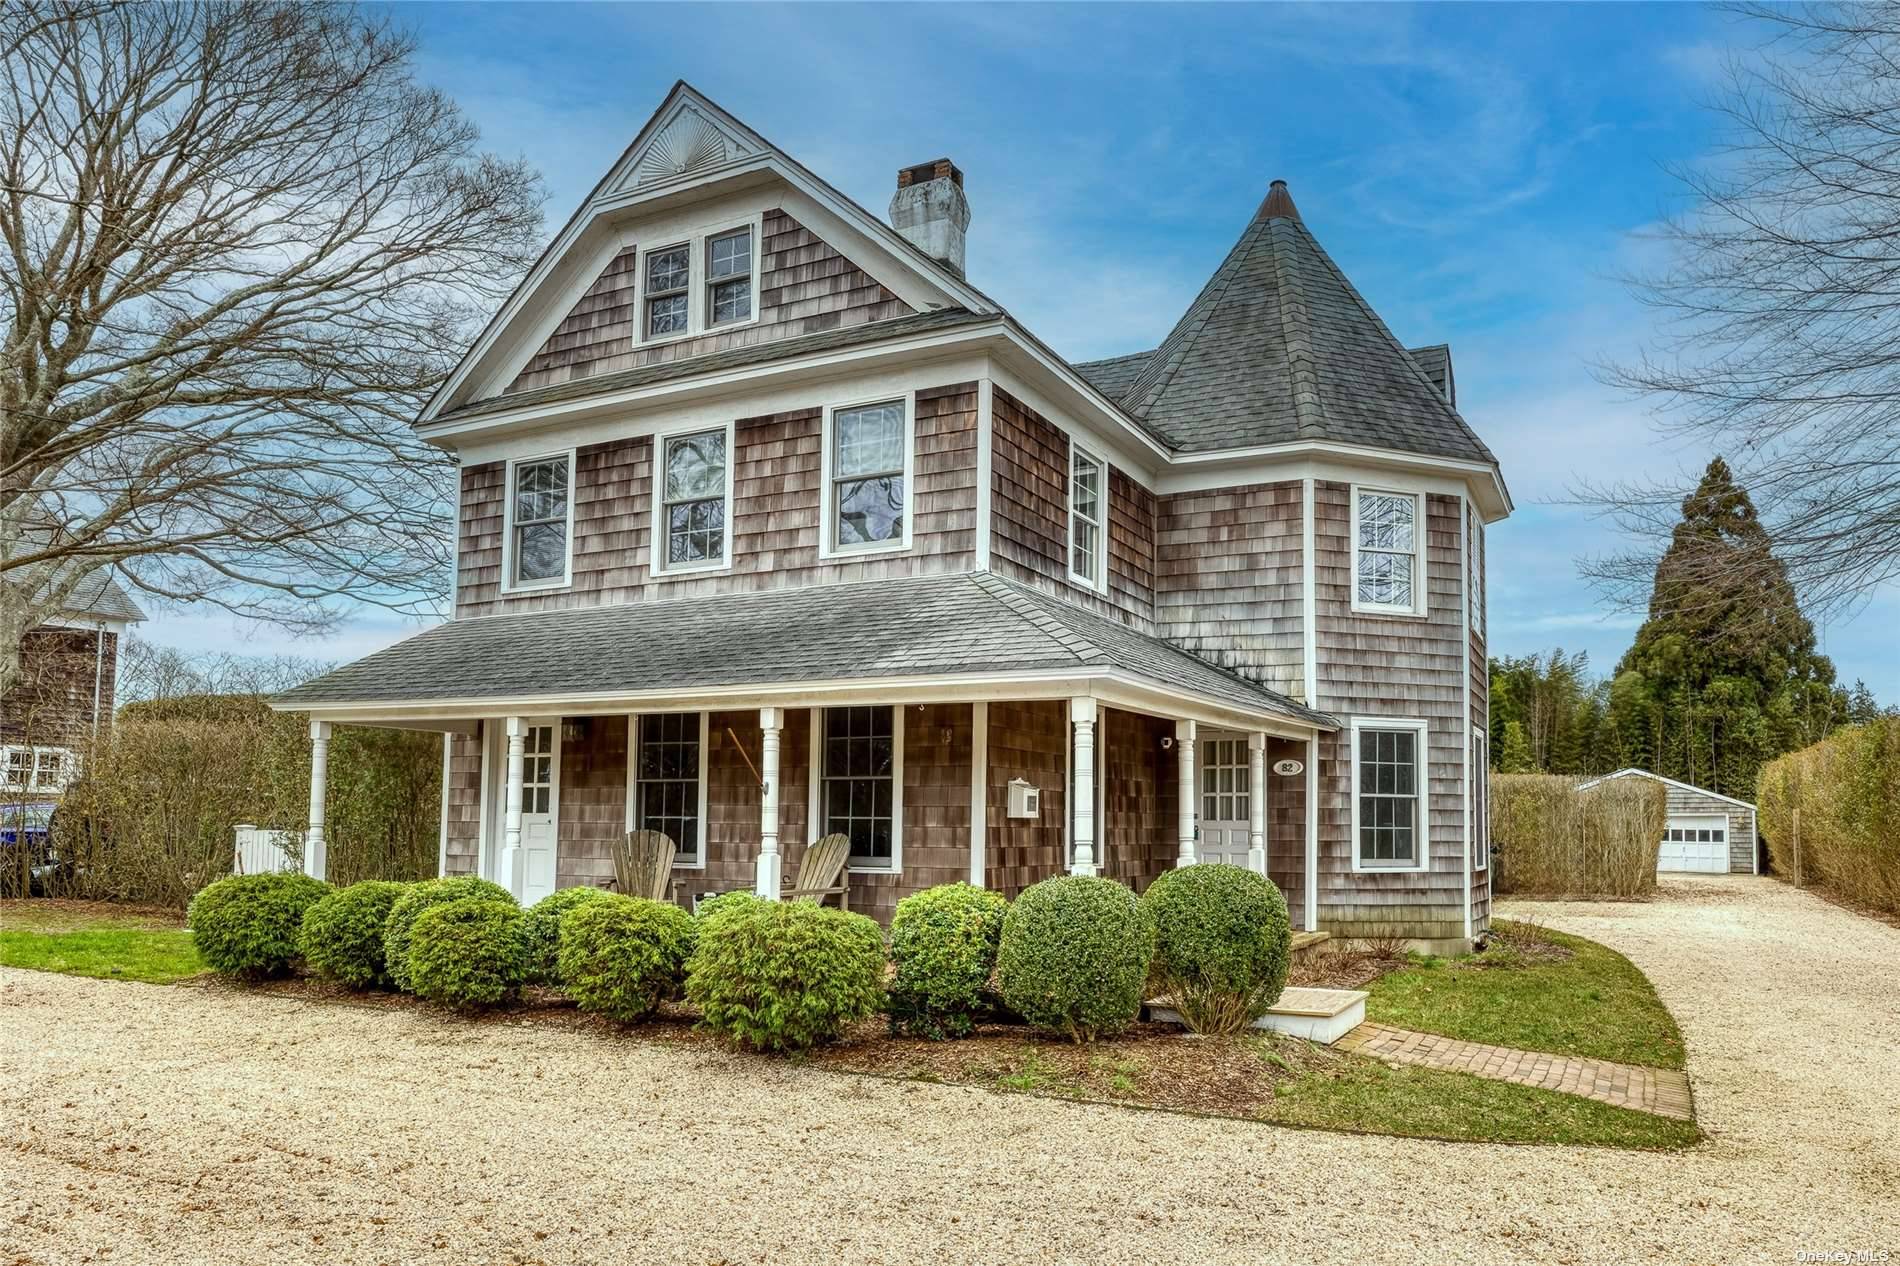 Welcome to 82 Powell Ave, a delightful Two Family Residential property nestled in the prestigious Village of Southampton, NY.